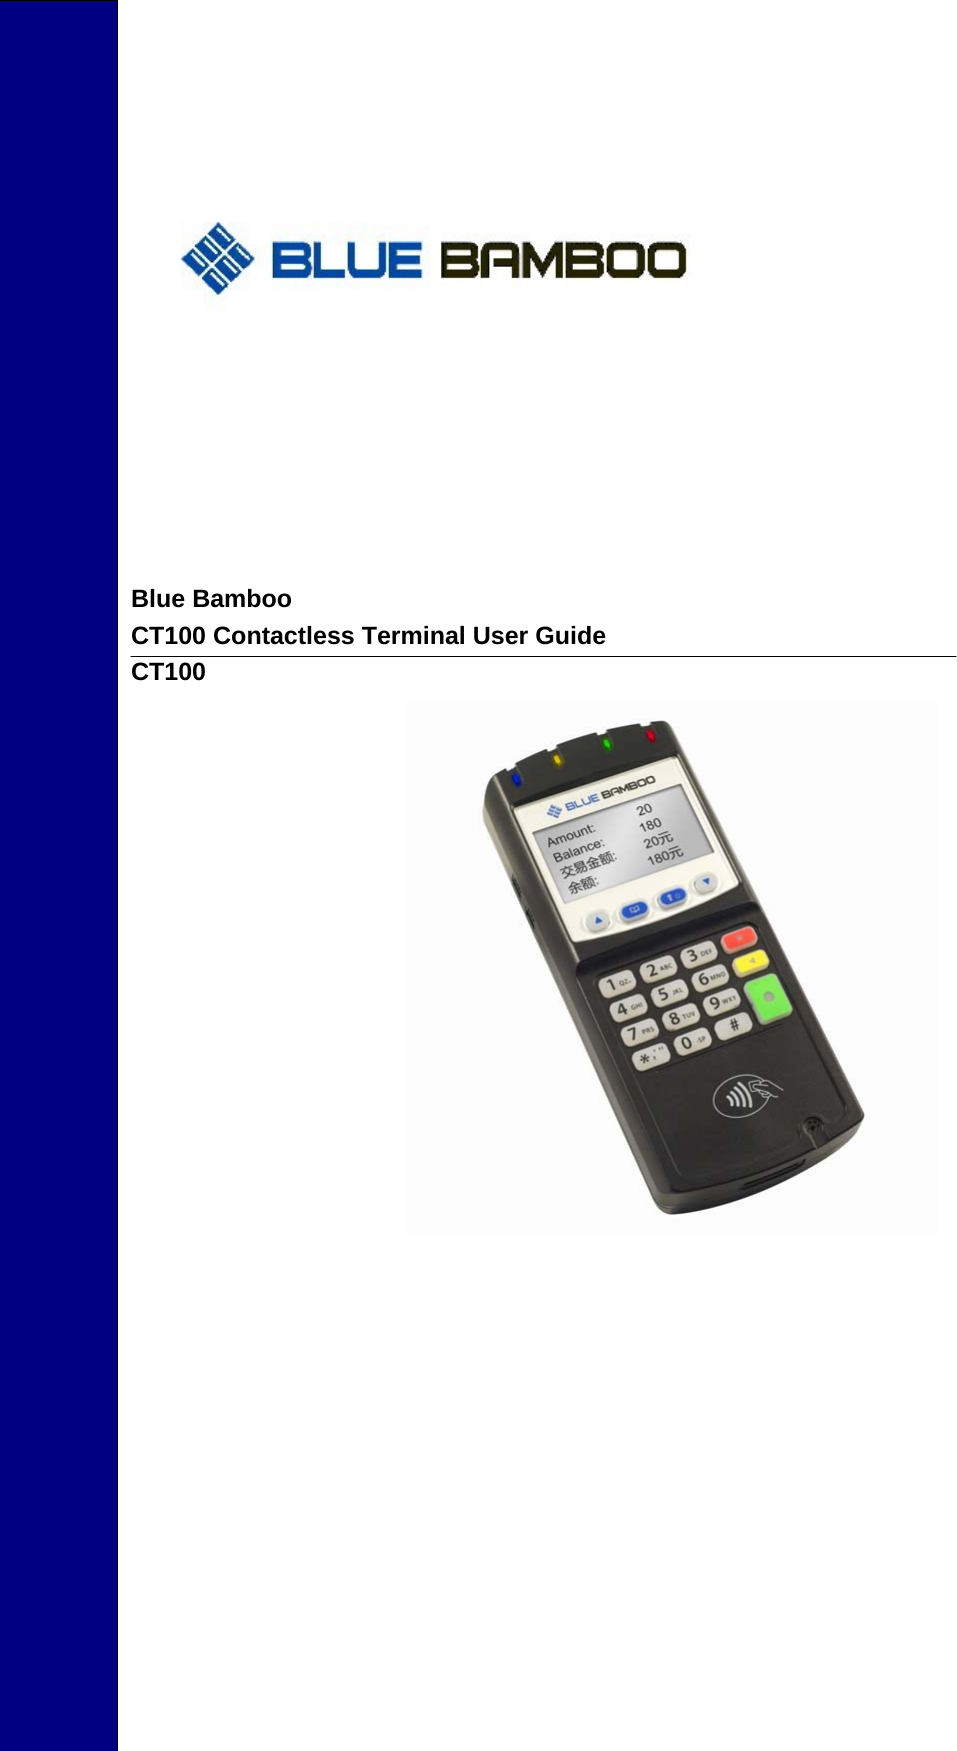            Blue Bamboo CT100 Contactless Terminal User Guide CT100          